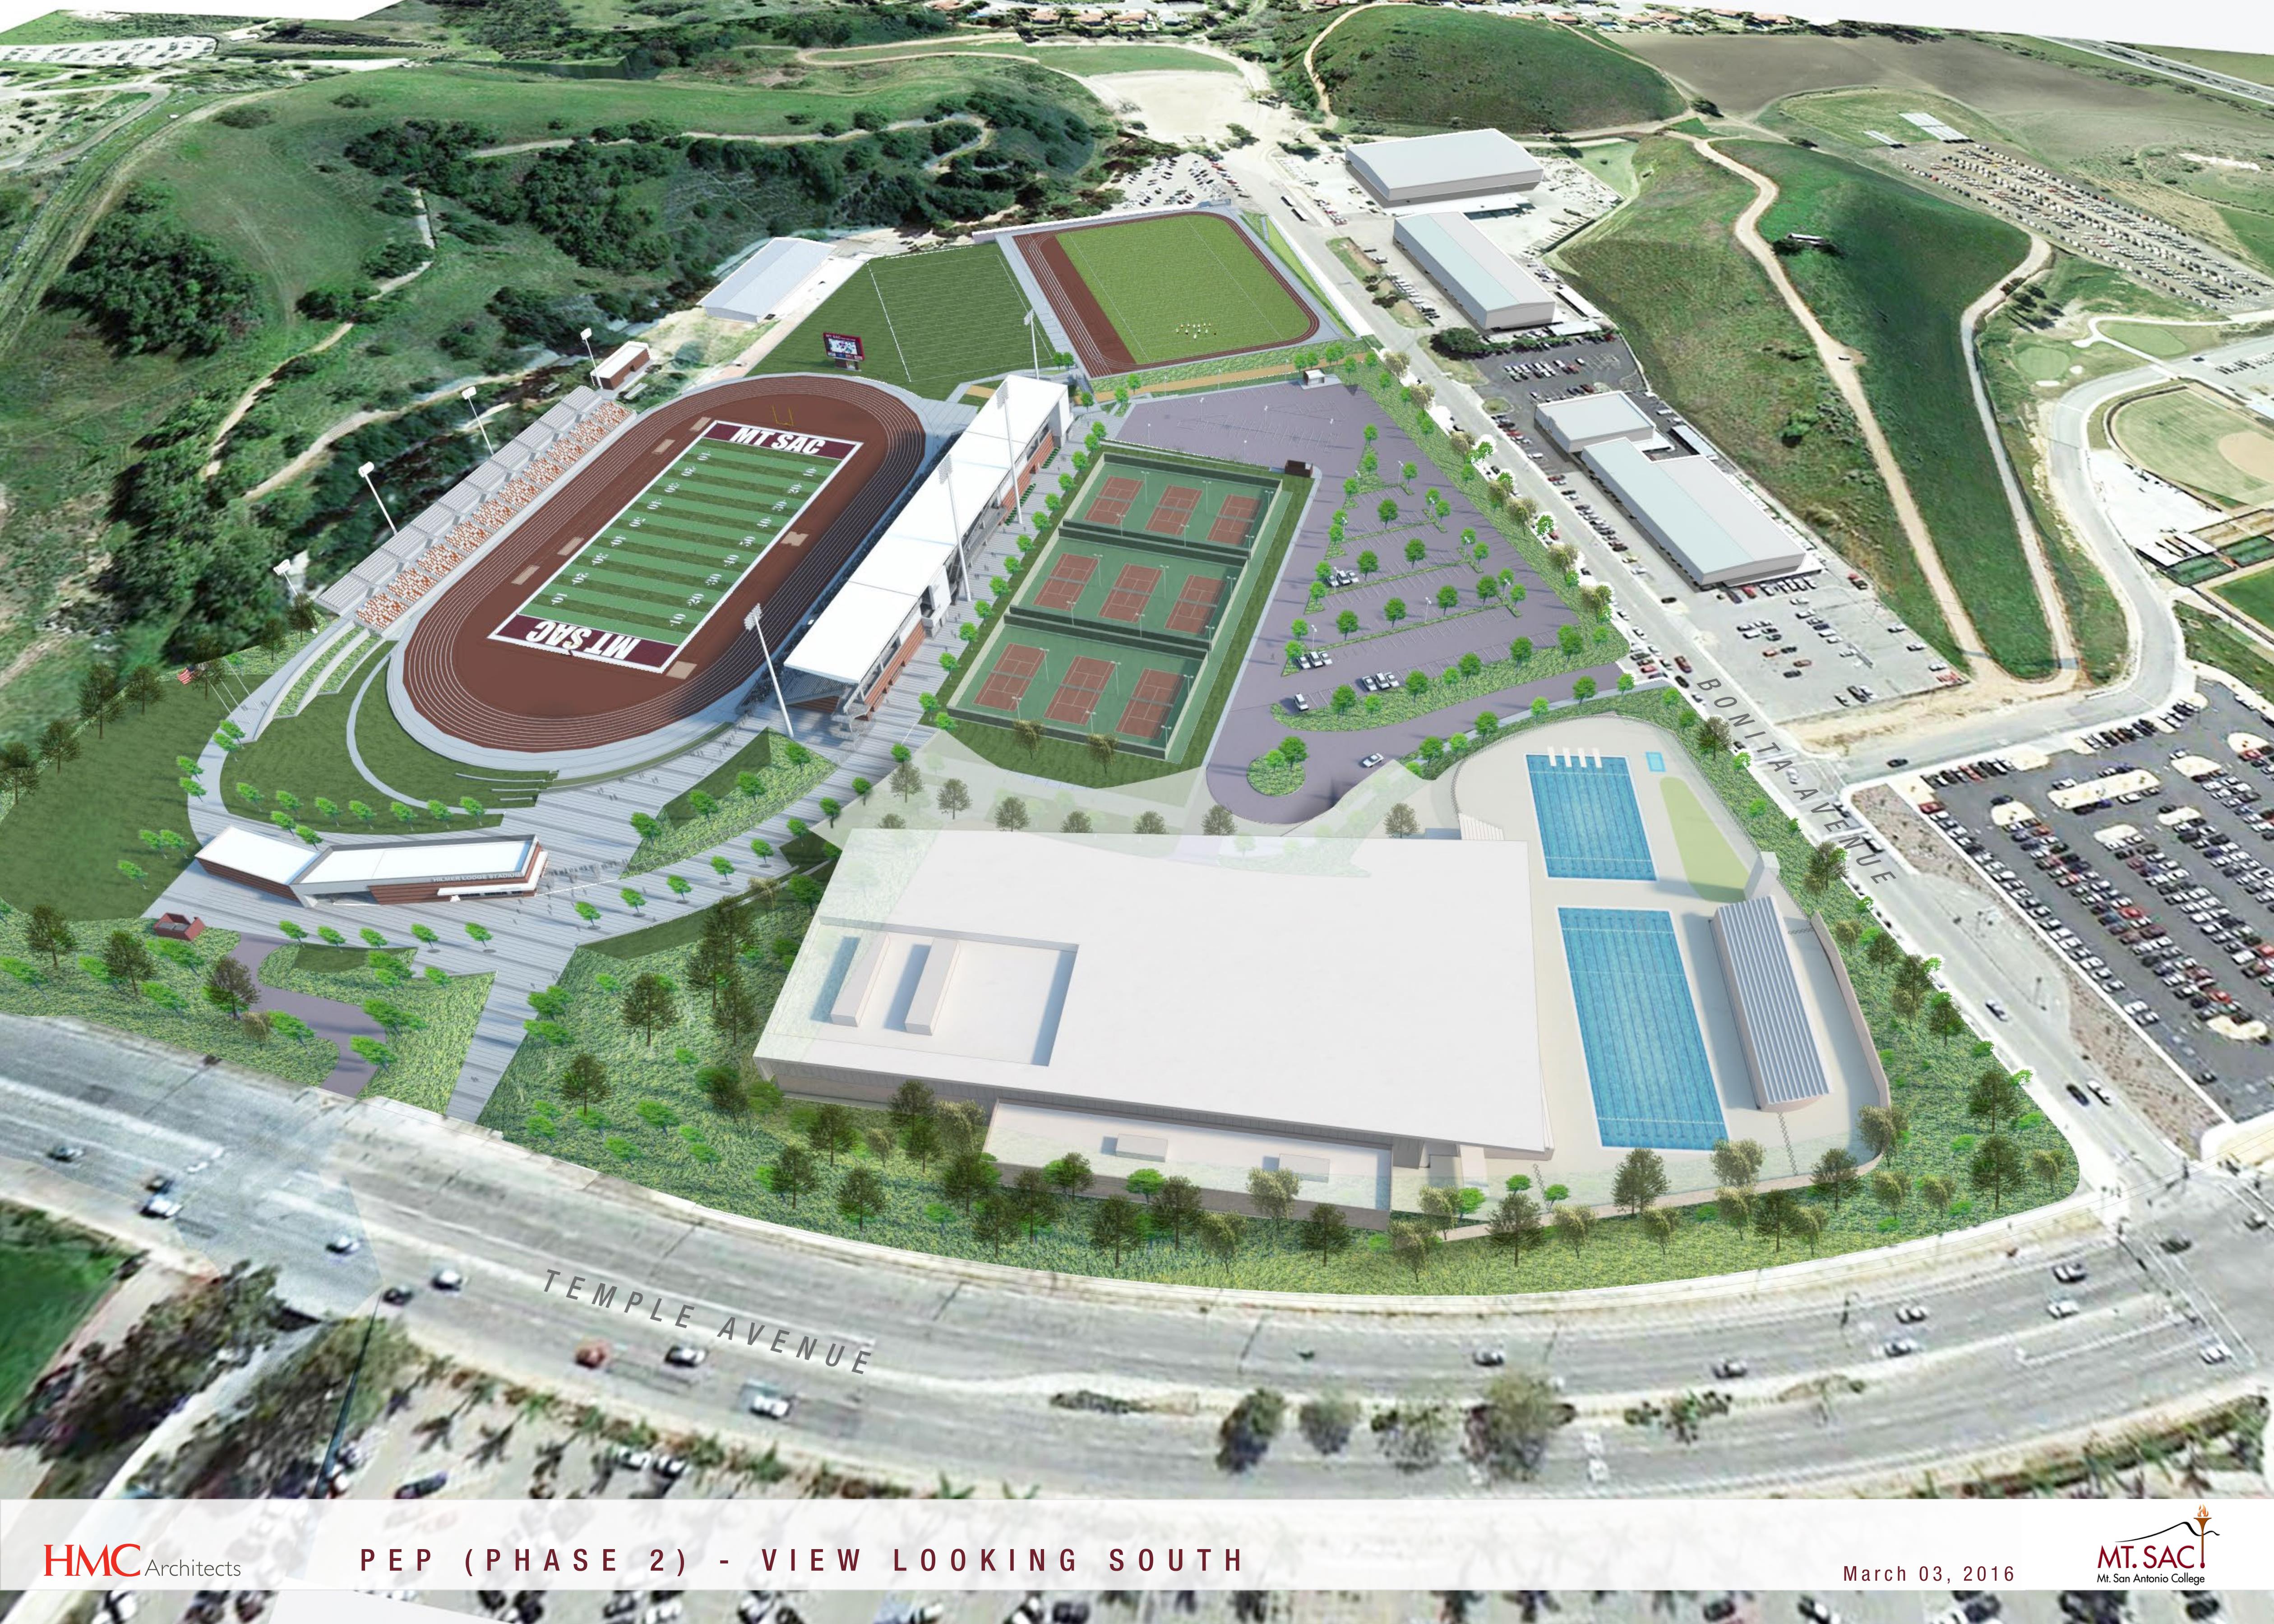 PEP Phase 2 Aerial View